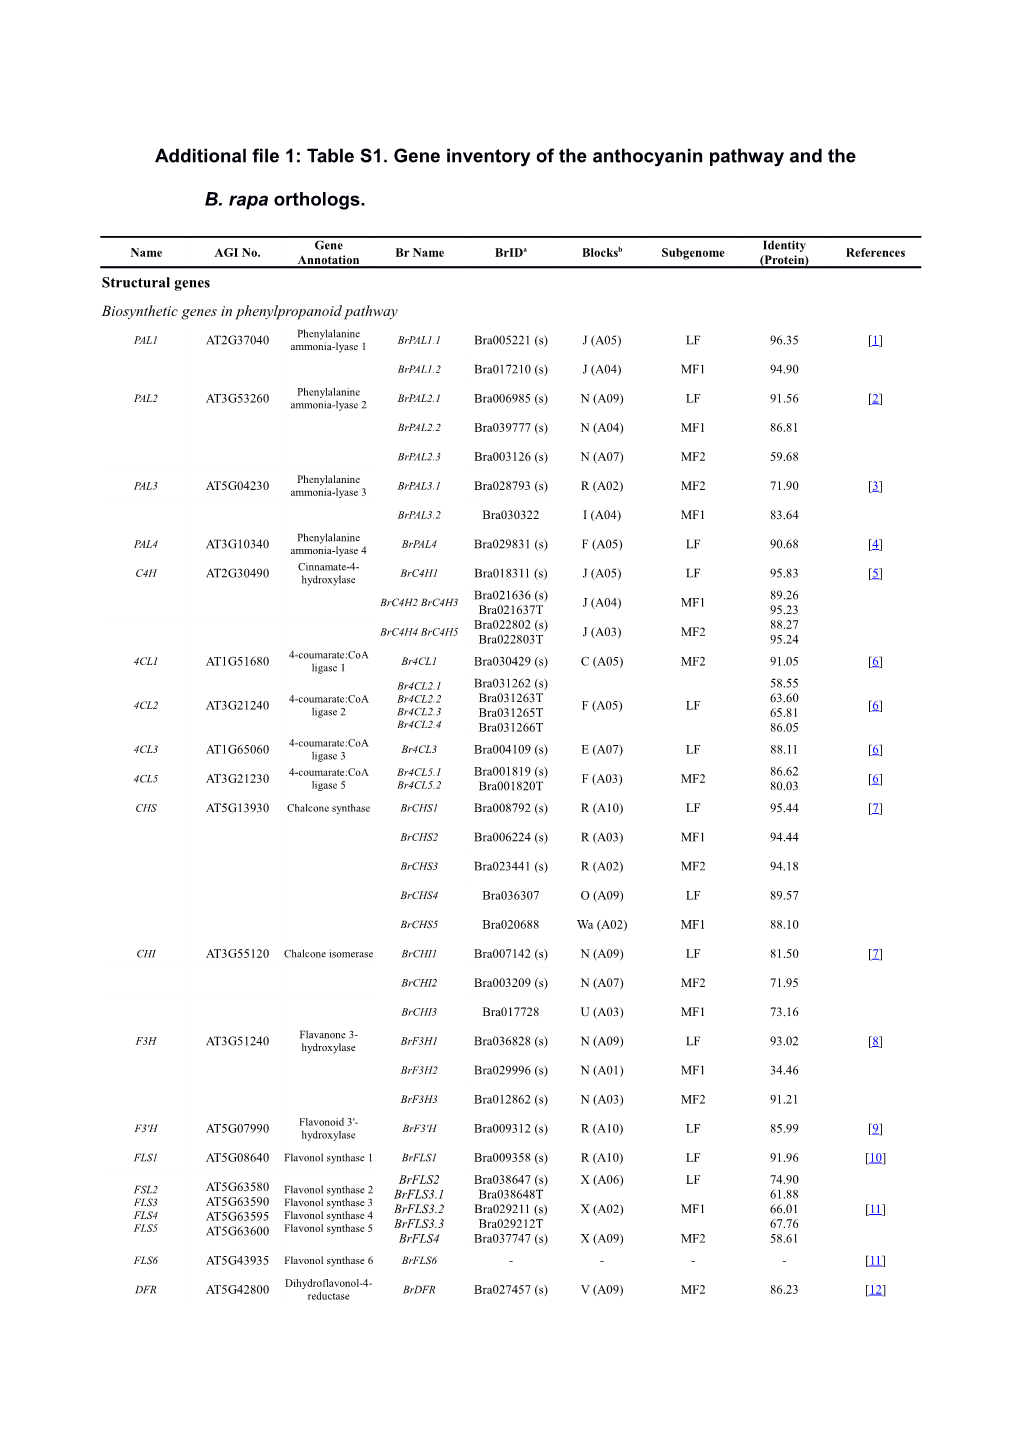 Additional File 1: Table S1. Gene Inventory of the Anthocyanin Pathway and the B. Rapa